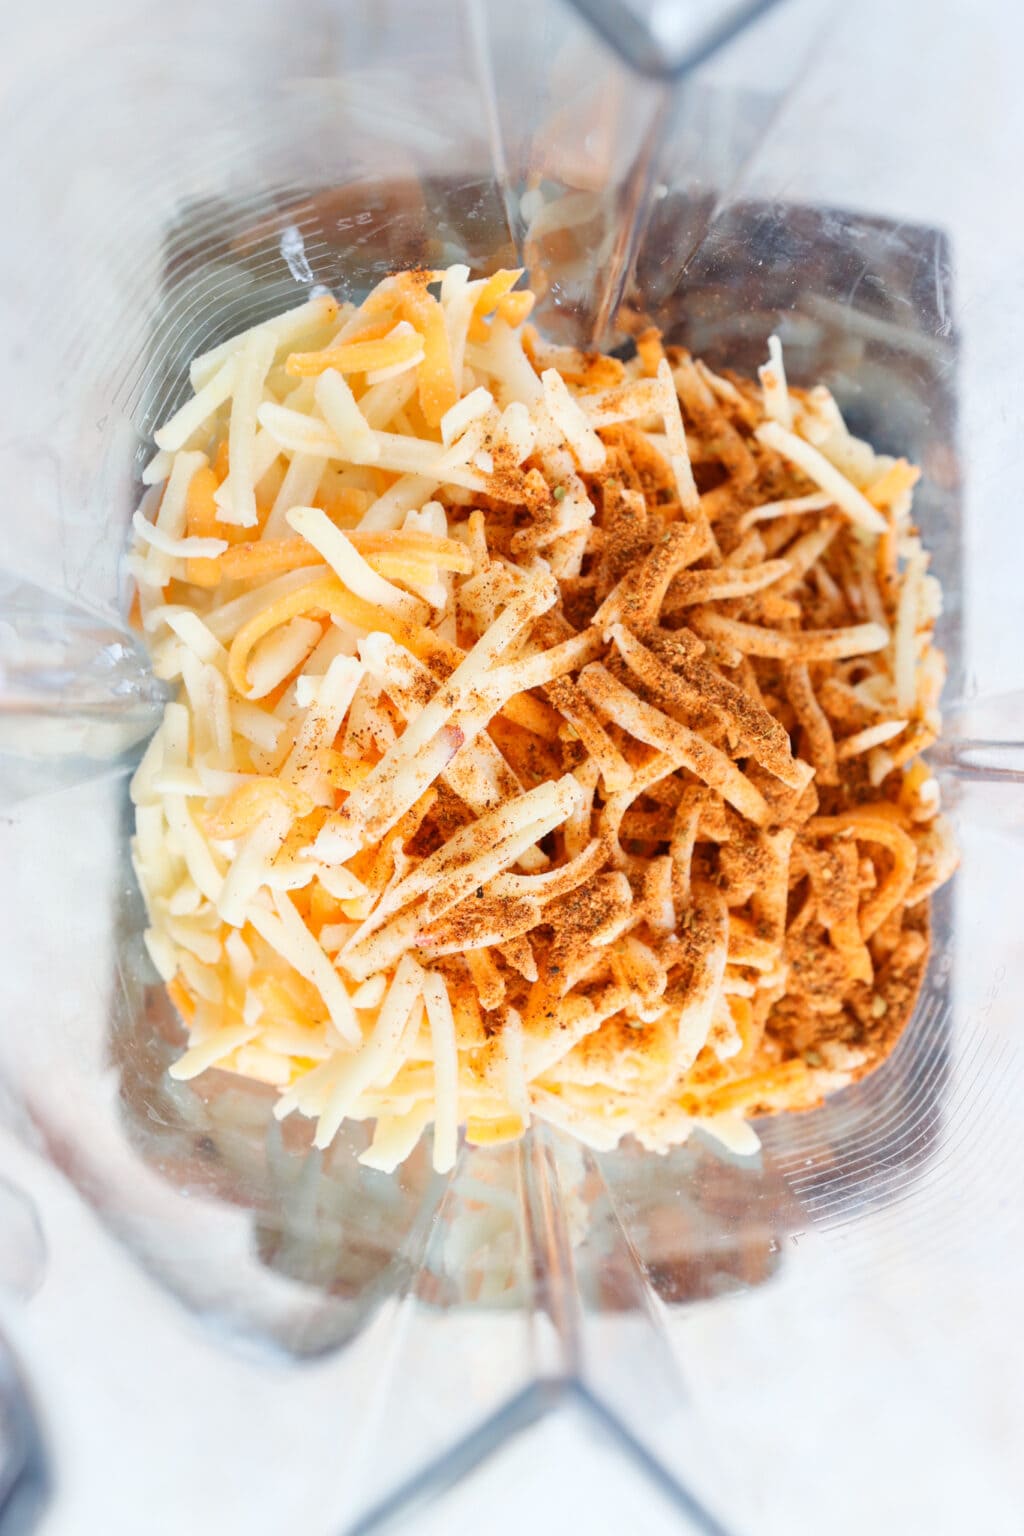 Ingredients for 5-Minute Warm Queso Dip With Cottage Cheese unblended in a blender, including, cottage cheese, shredded tex mex cheese, taco seasoning, pickled jalapenos